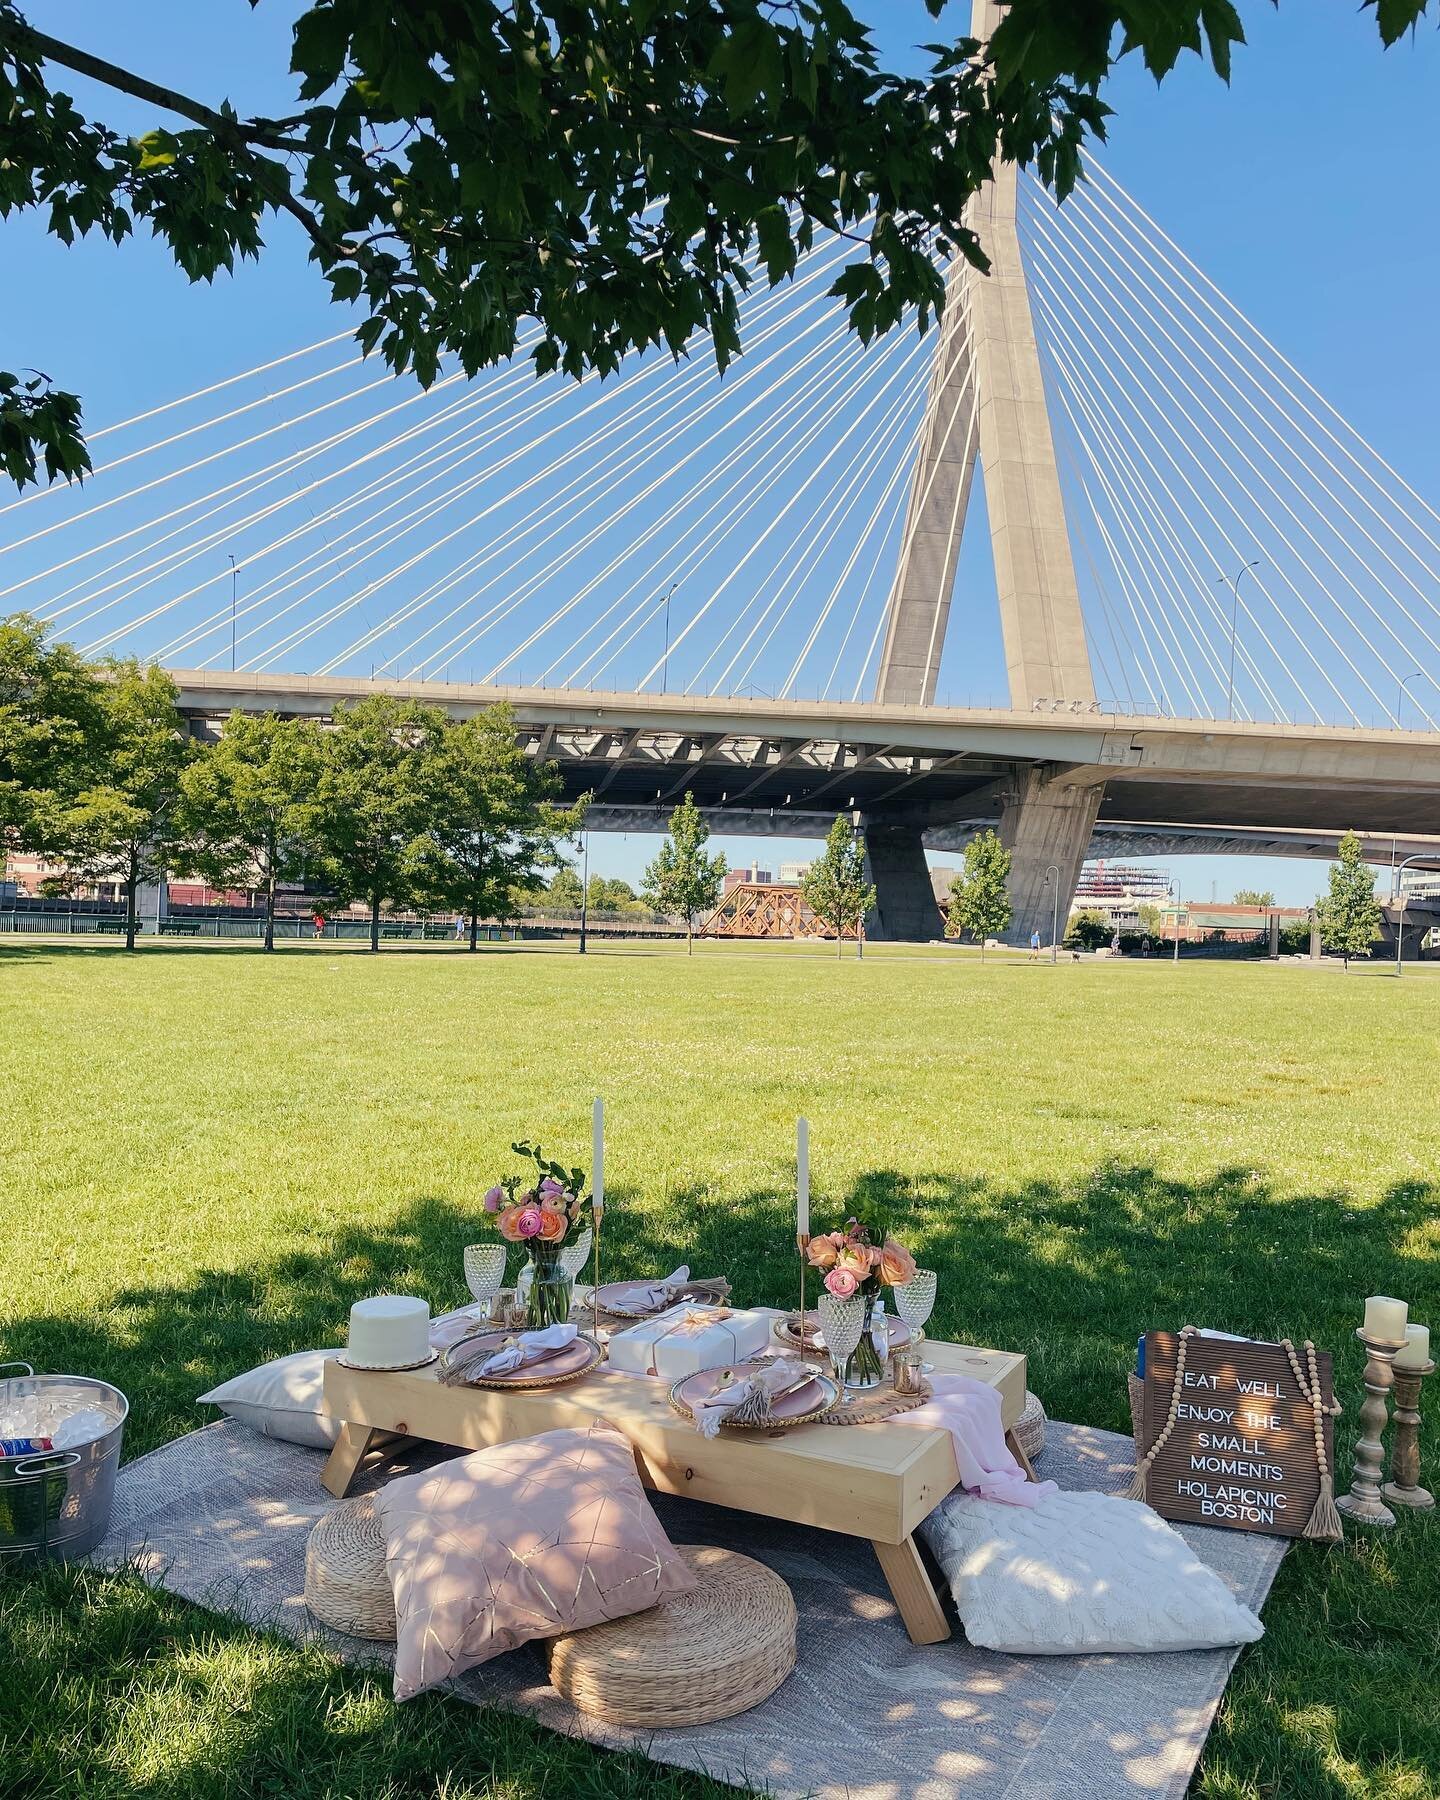 Breakfast views 📸

Visiting Boston? Enjoy the outdoors and warm weather with a picnic setup from Hola Picnic 🥂

Enjoy the rest of summer! Book your date with us ✨